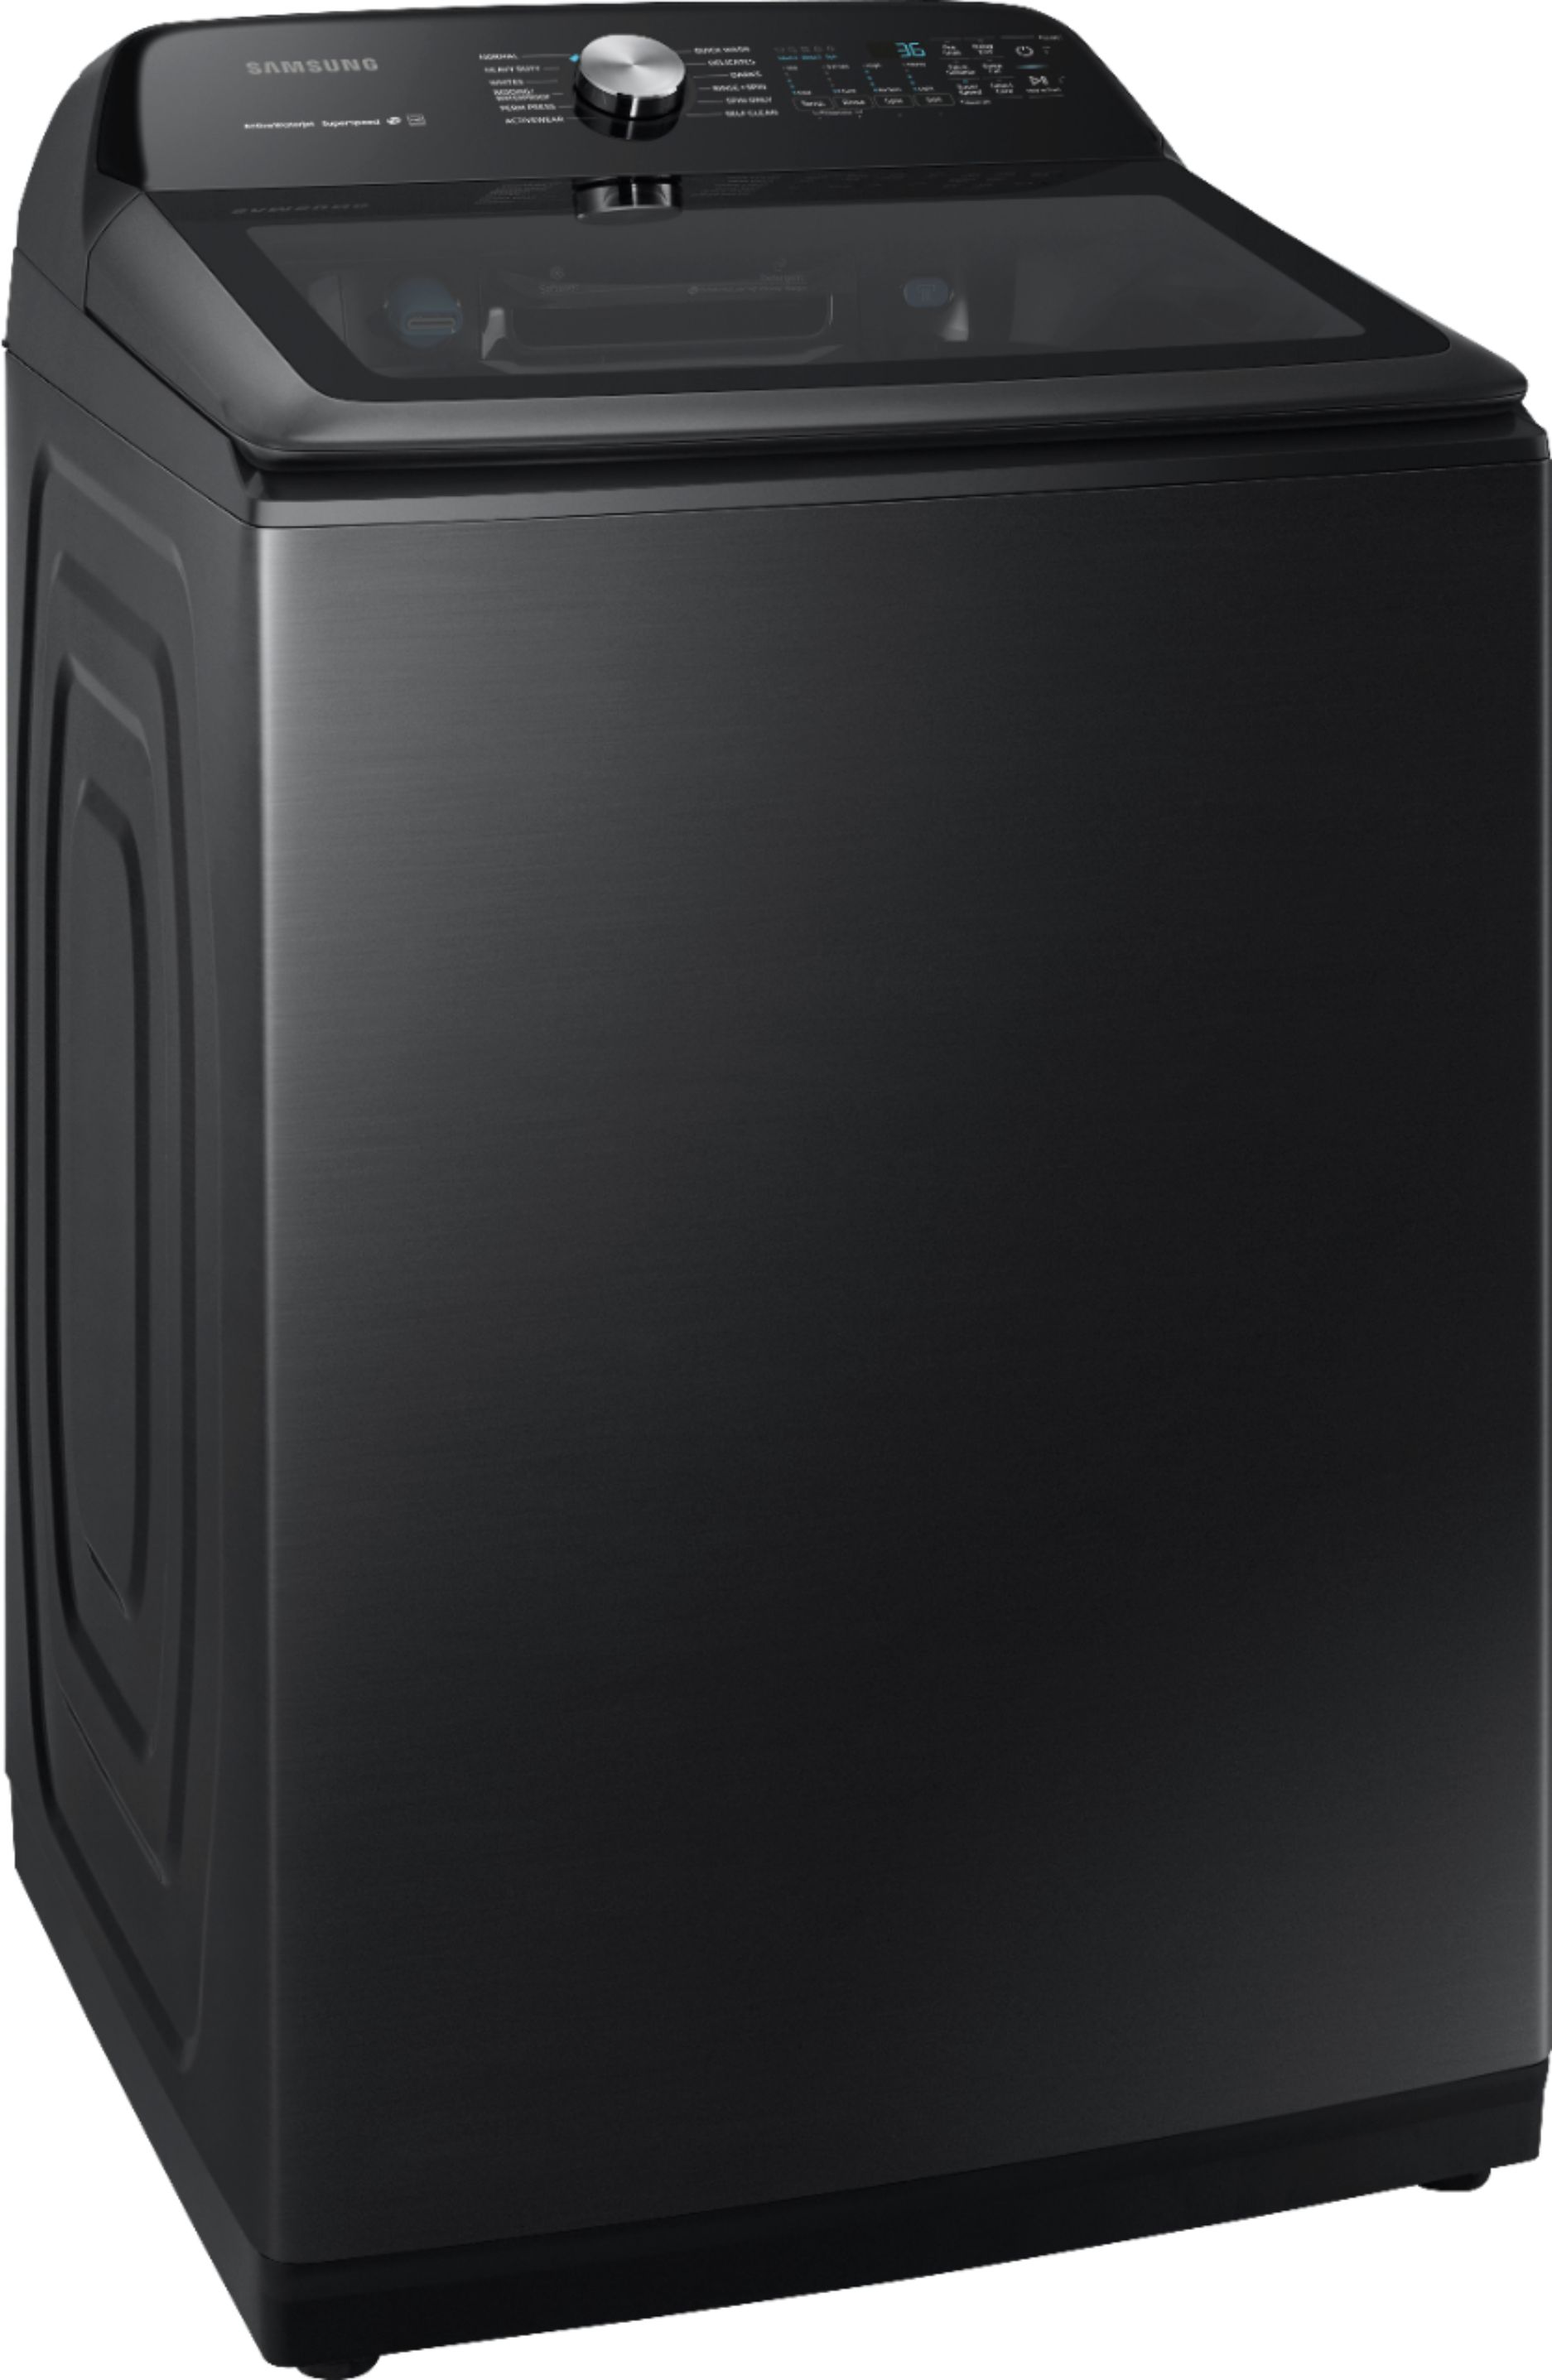 Angle View: Samsung - 5.0 Cu. Ft. High-Efficiency Top Load Washer with Super Speed - Black Stainless Steel